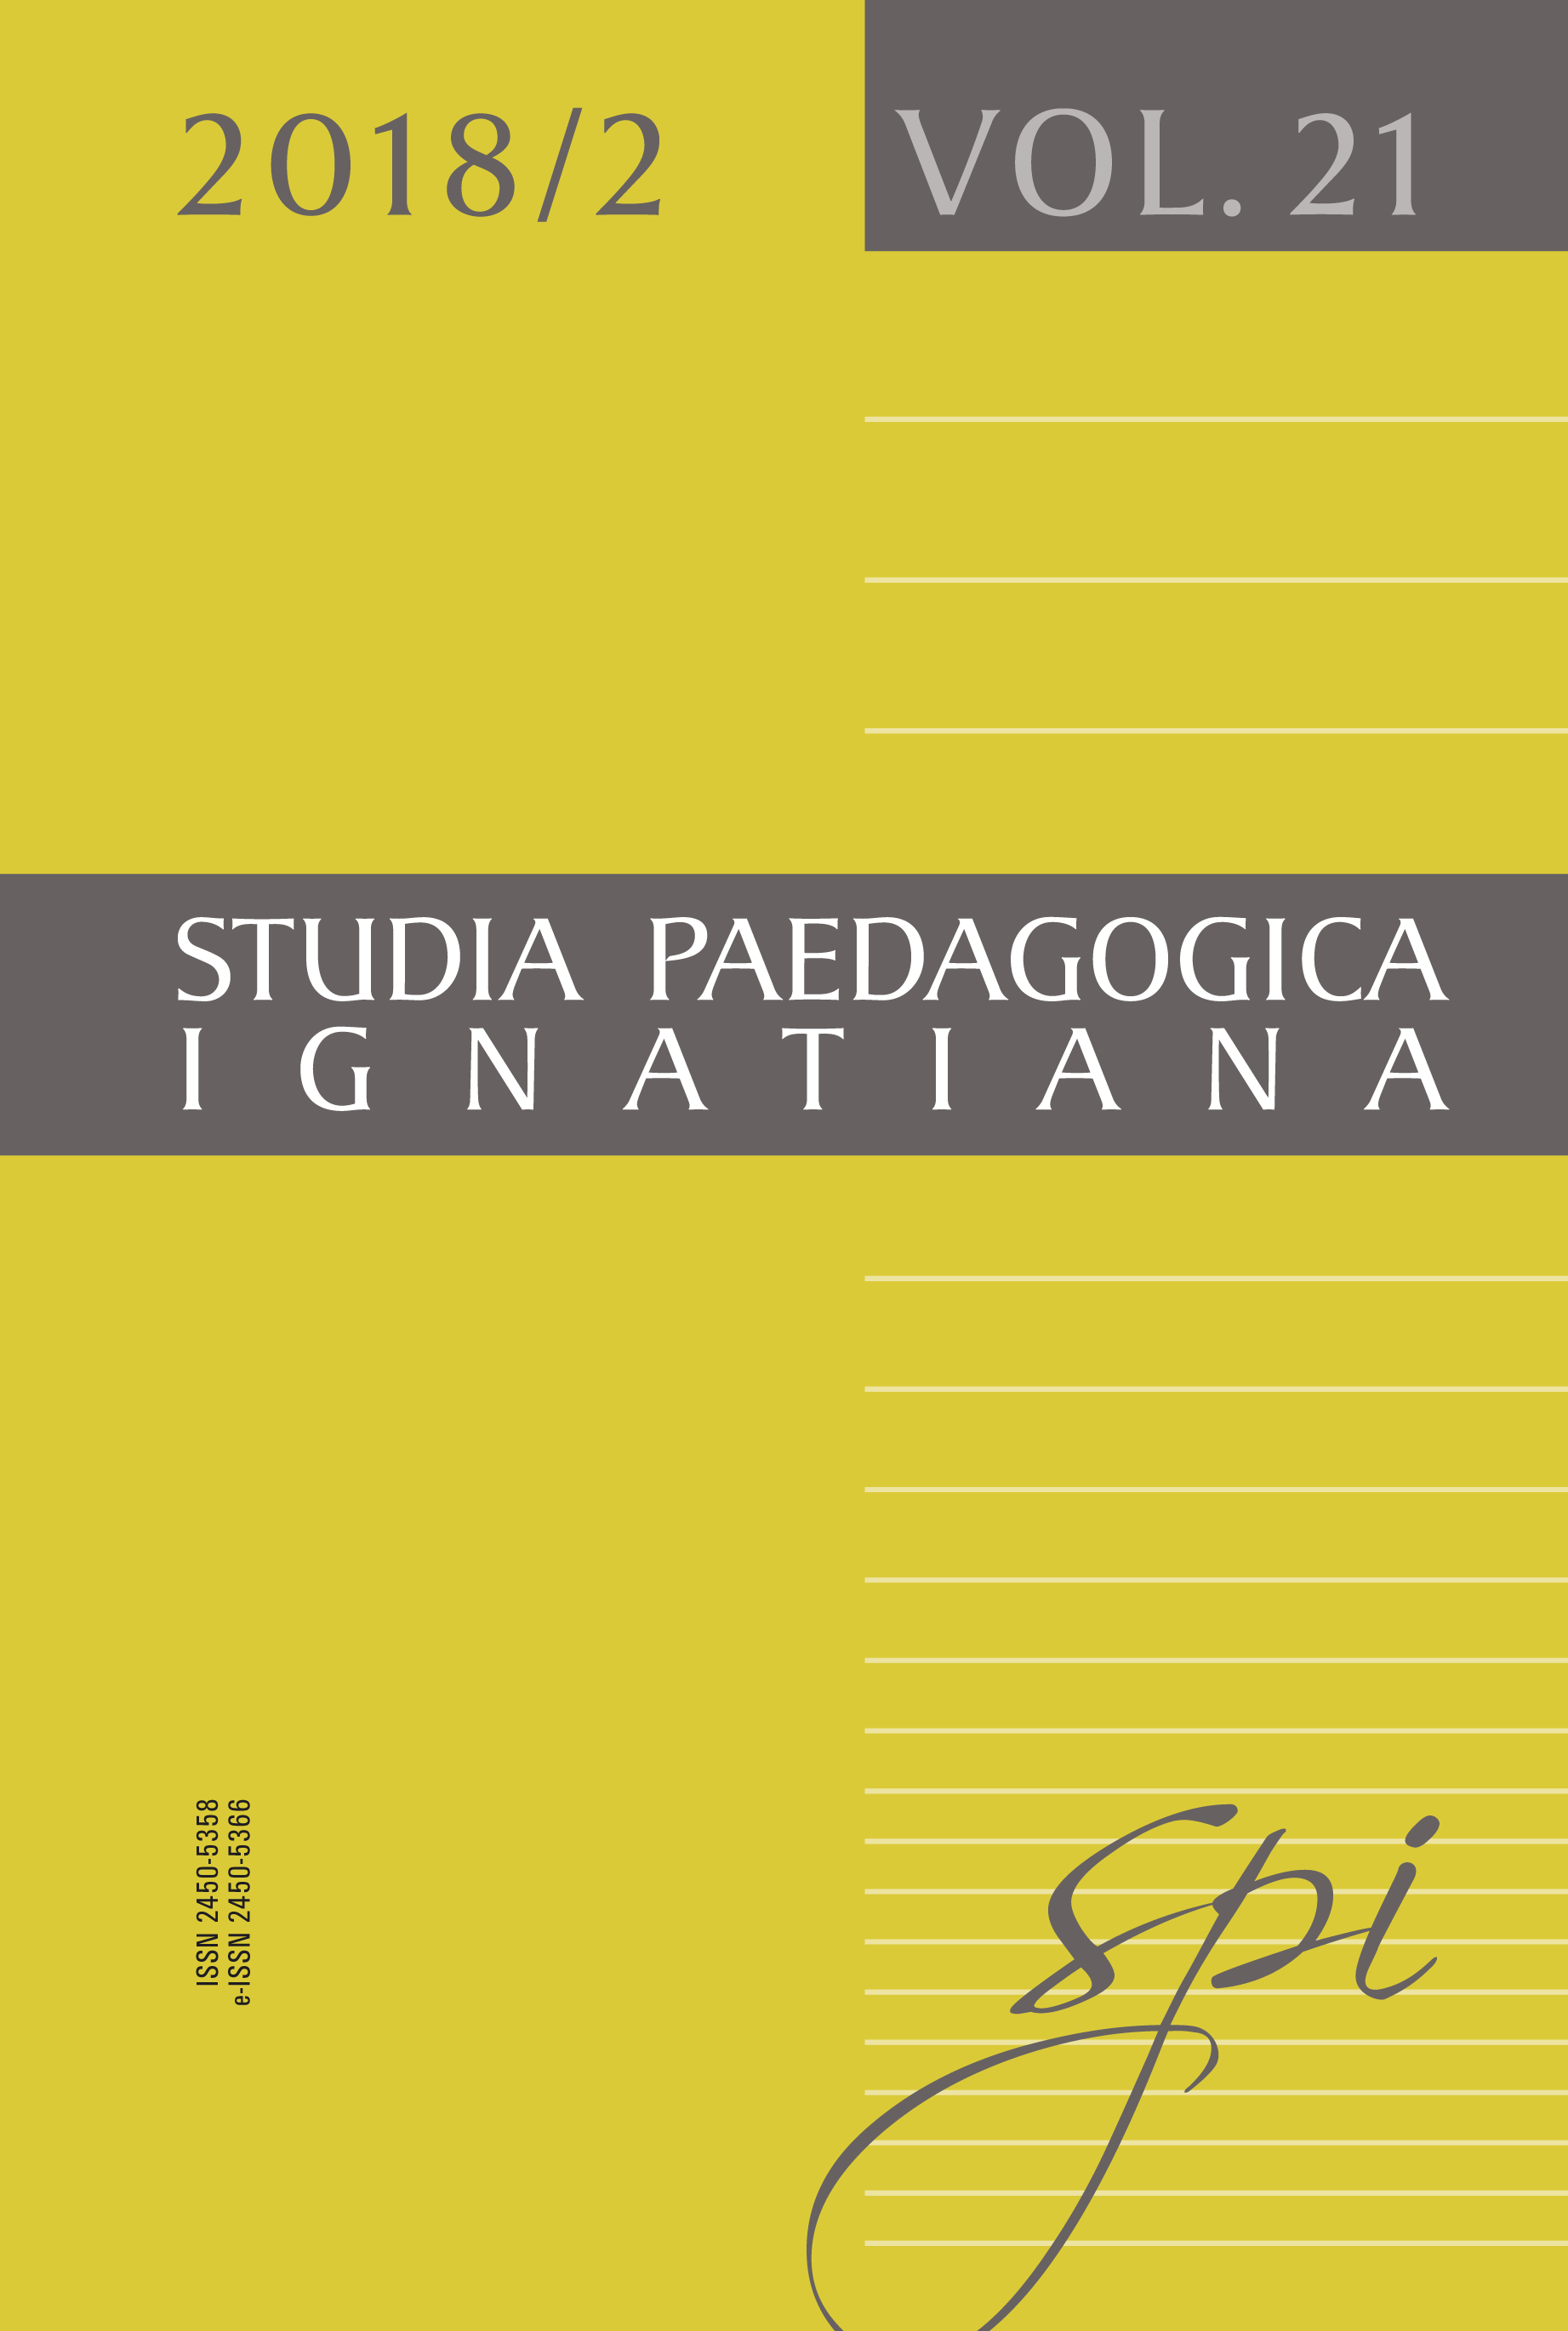 Italian-Polish Research on the History of the Care and Education: Stanisław Litak and Gabriele De Rosa Cover Image